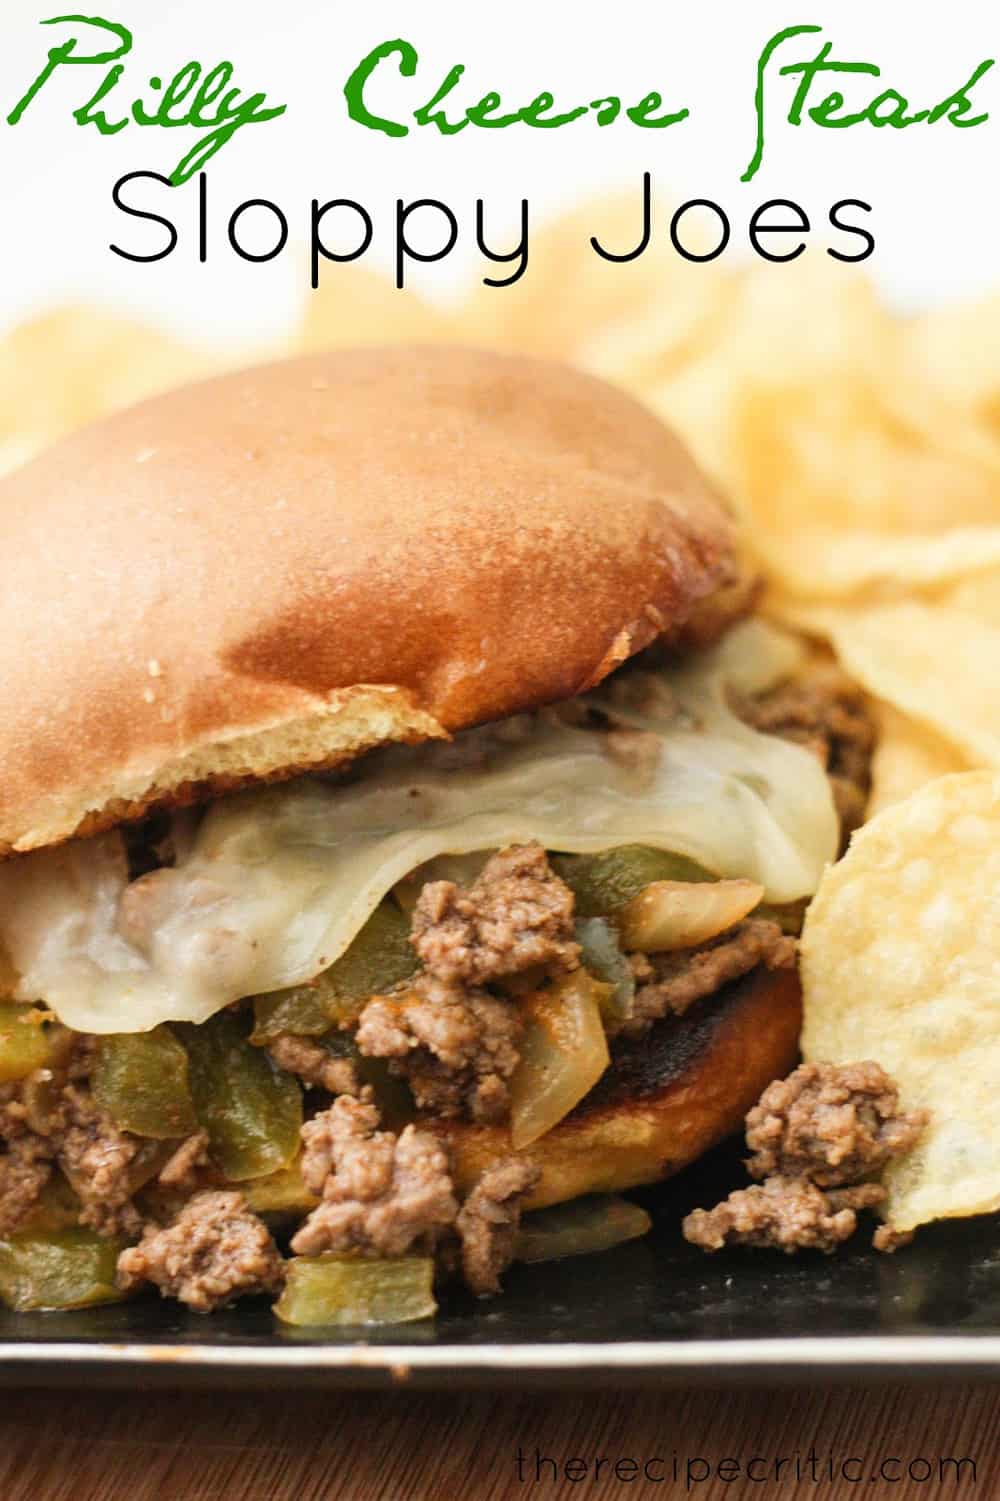 Philly Cheese Steak Sloppy Joes | The Recipe Critic